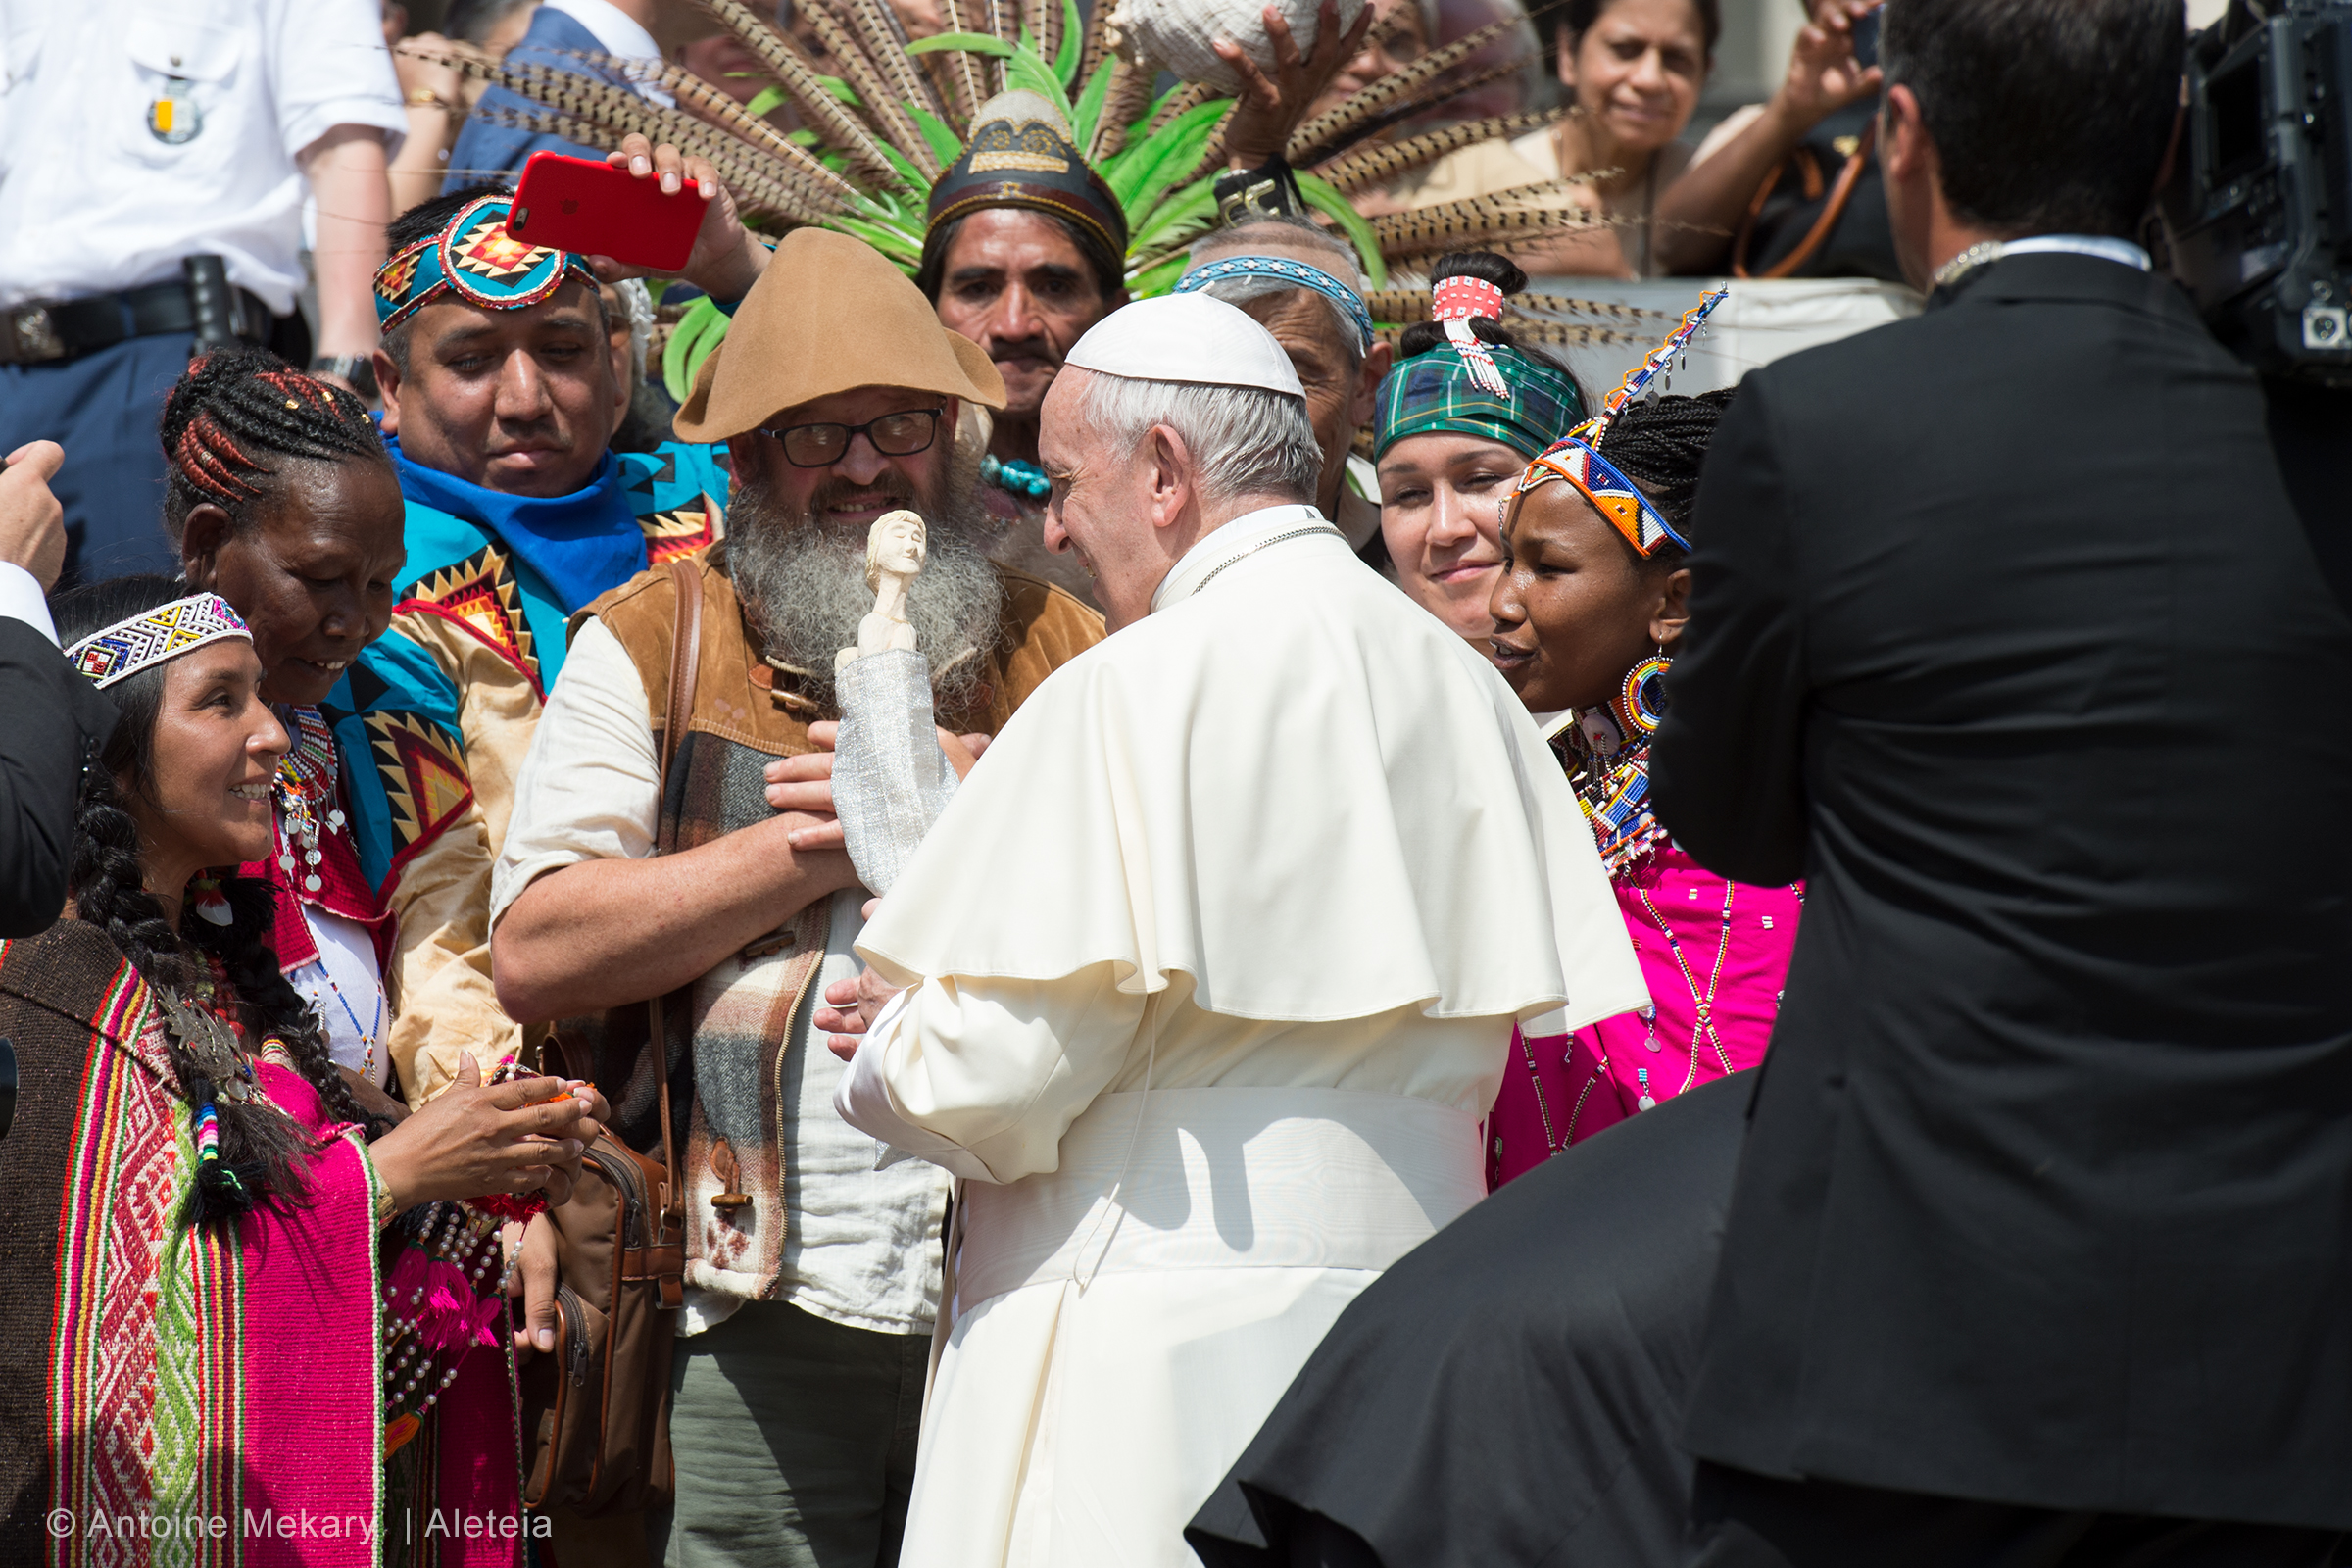 POPE FRANCIS,NATIVES,INDIGENOUS